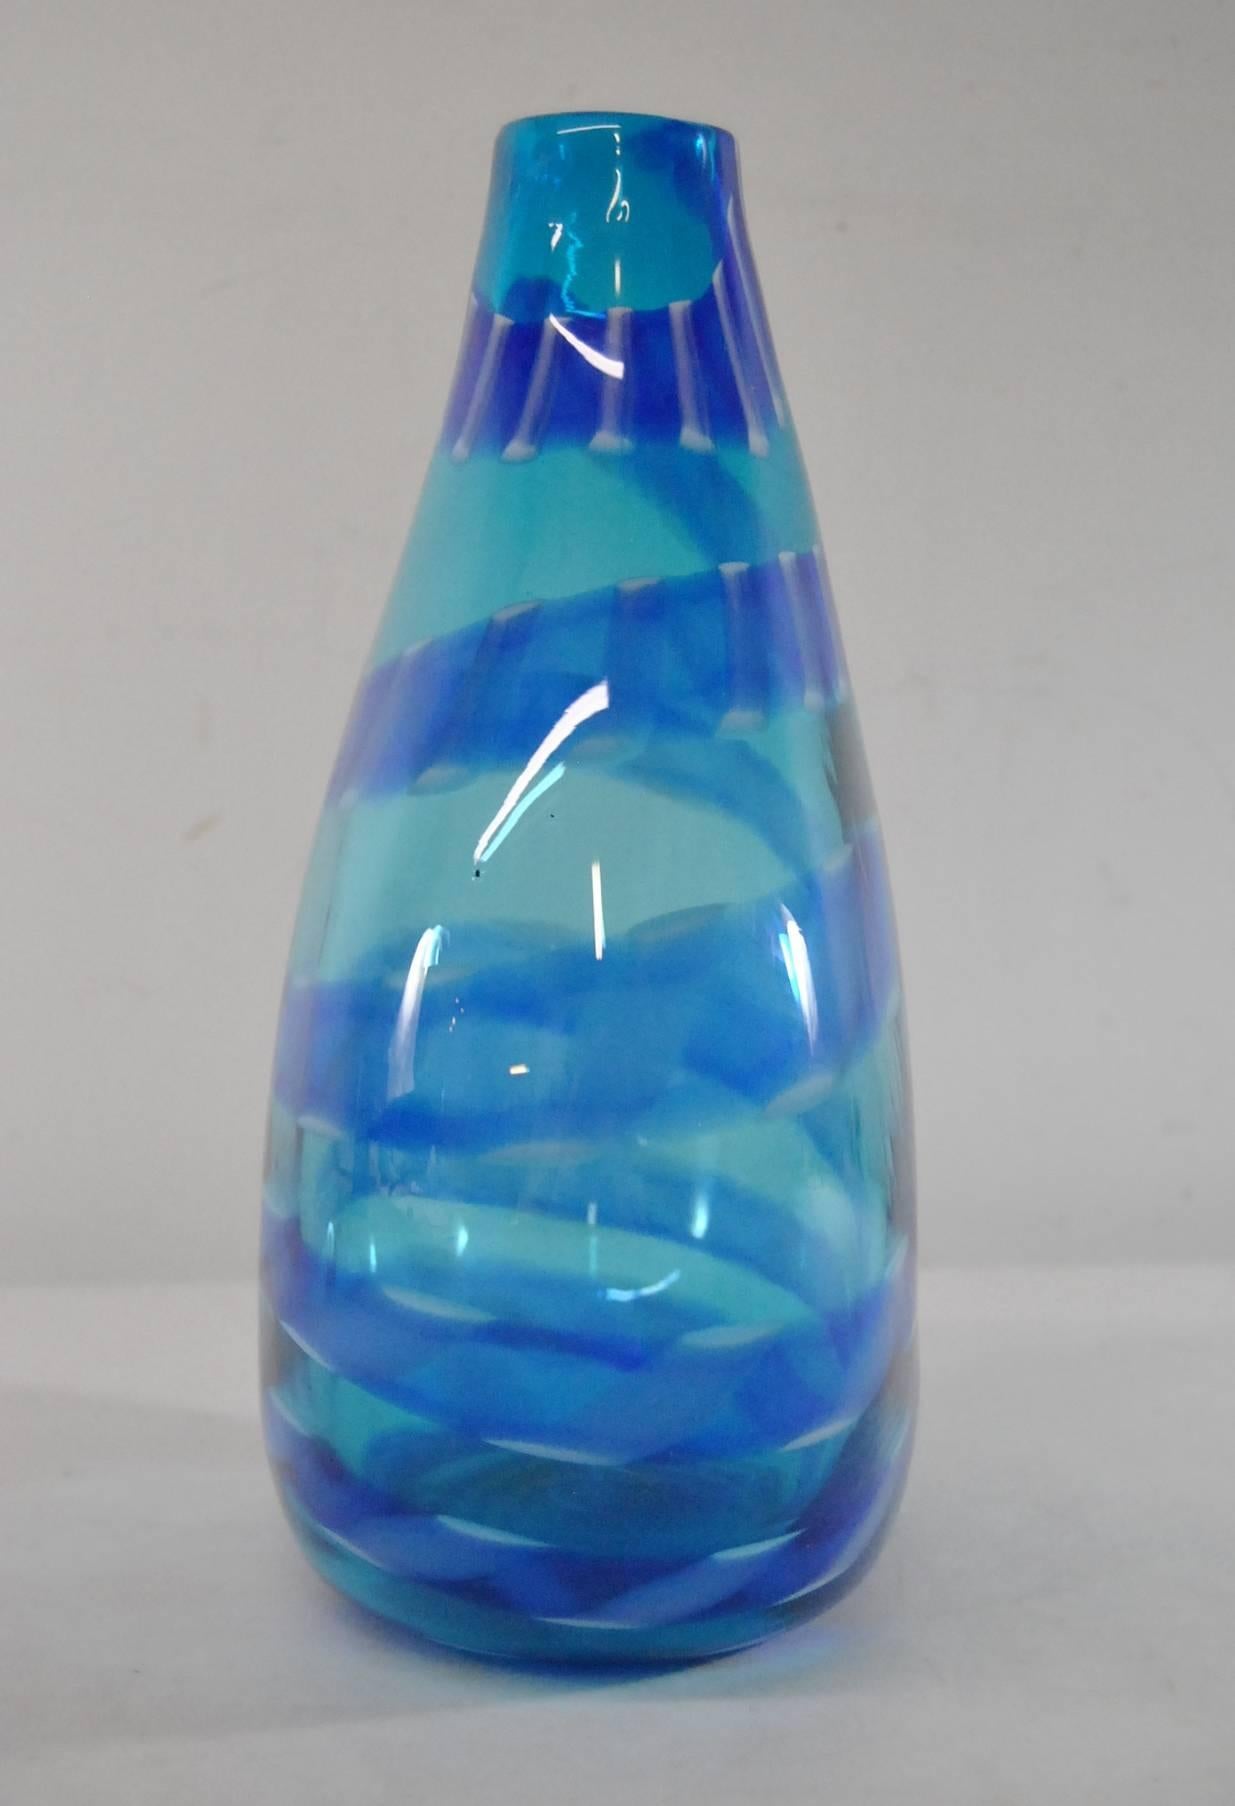 Beautiful aqua blue Murano vase by Barovier. Aqua background is accented with a blue and opal striped ribbon that swirls around the body from top to bottom.